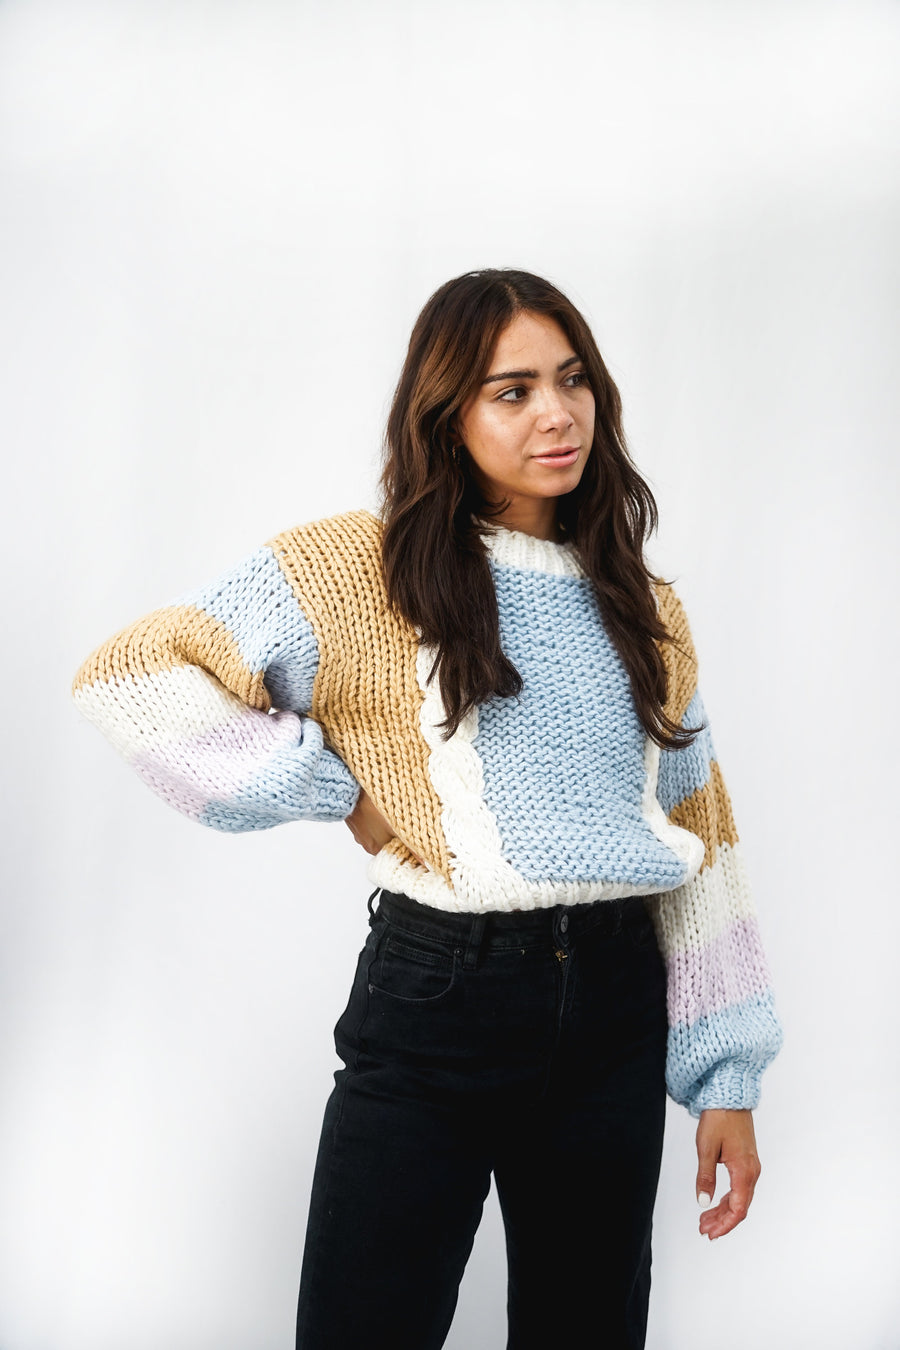 Cable Fronted Handmade Jumper | Blue-Mist CARDIGAN autumn-winter BLUE KNIT M - L S - M SALE stellino